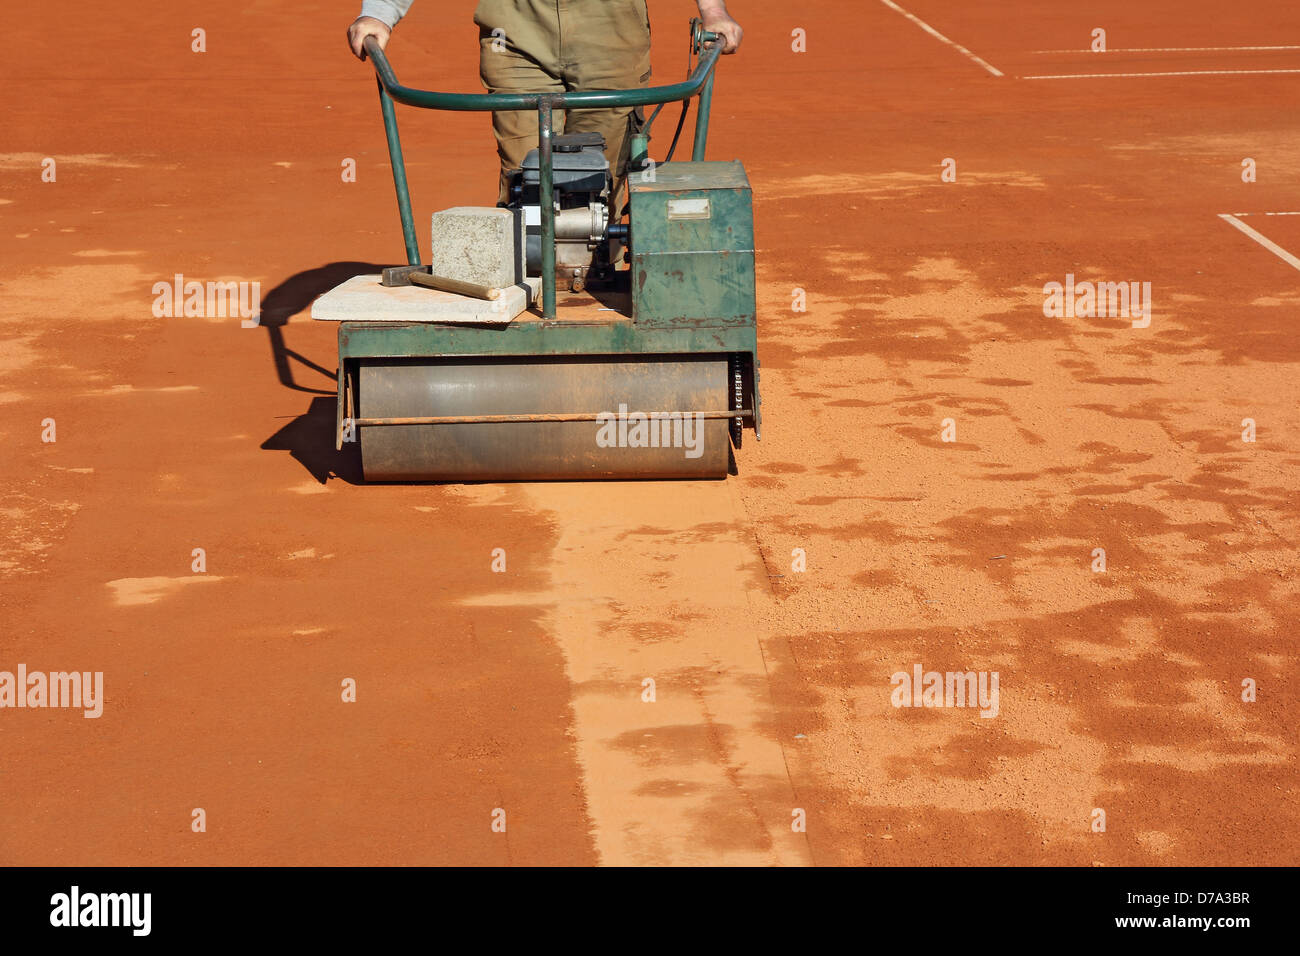 Worker with roller editing clay tennis court Stock Photo